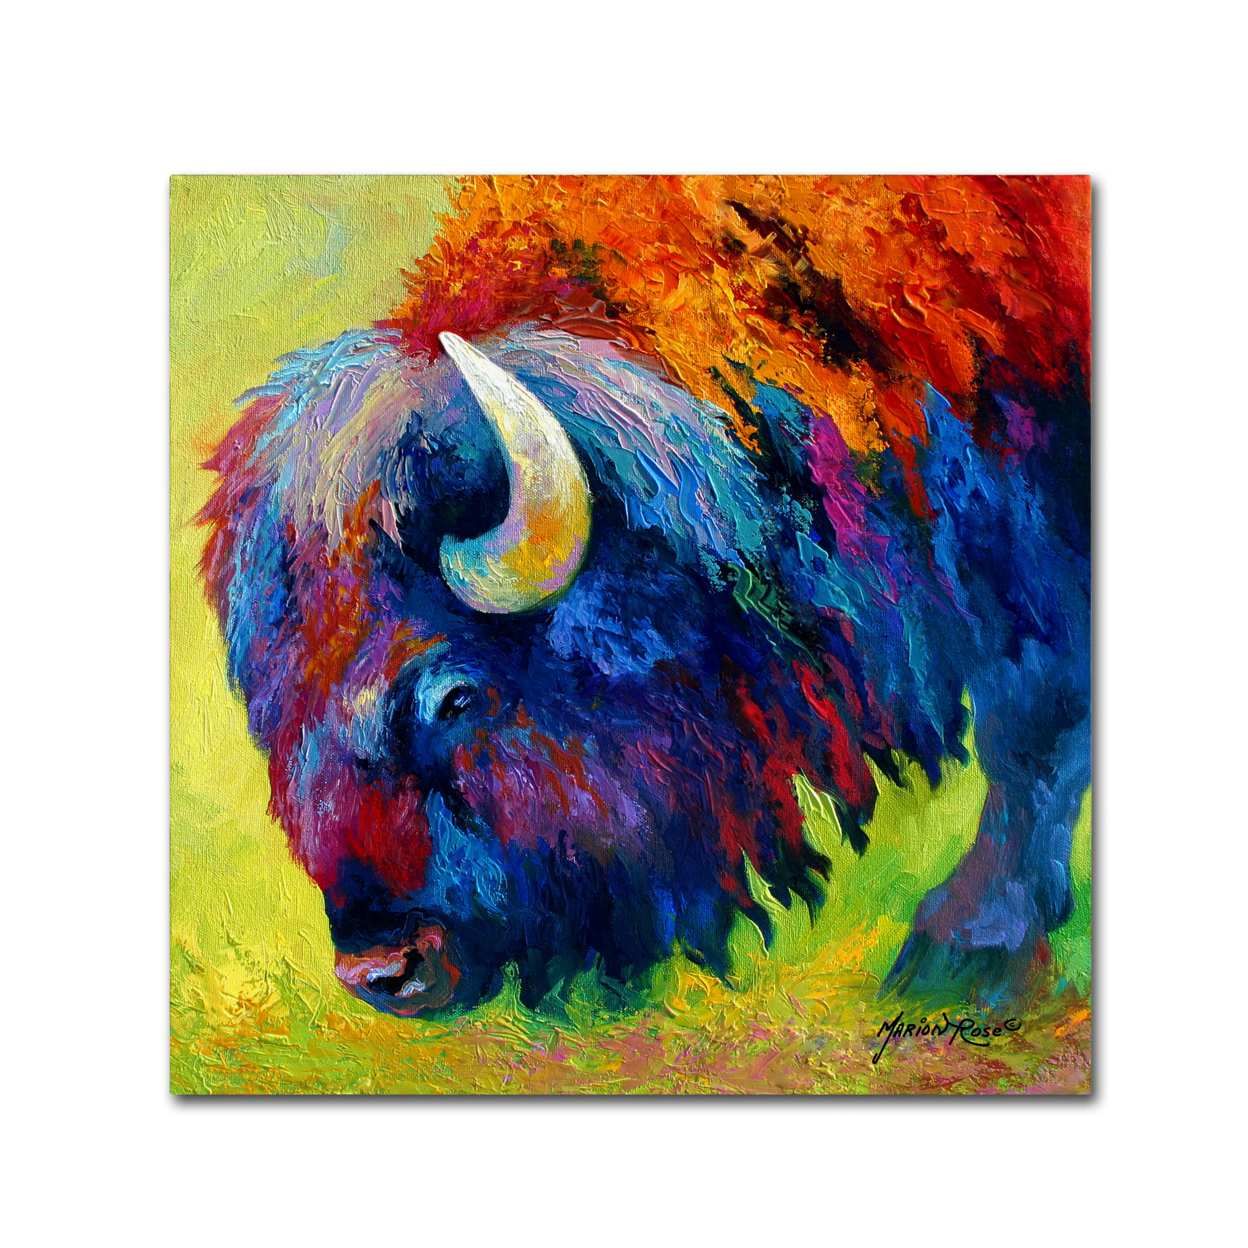 Marion Rose 'Bison Portrait II' Ready To Hang Canvas Art 18 X 18 Inches Made In USA